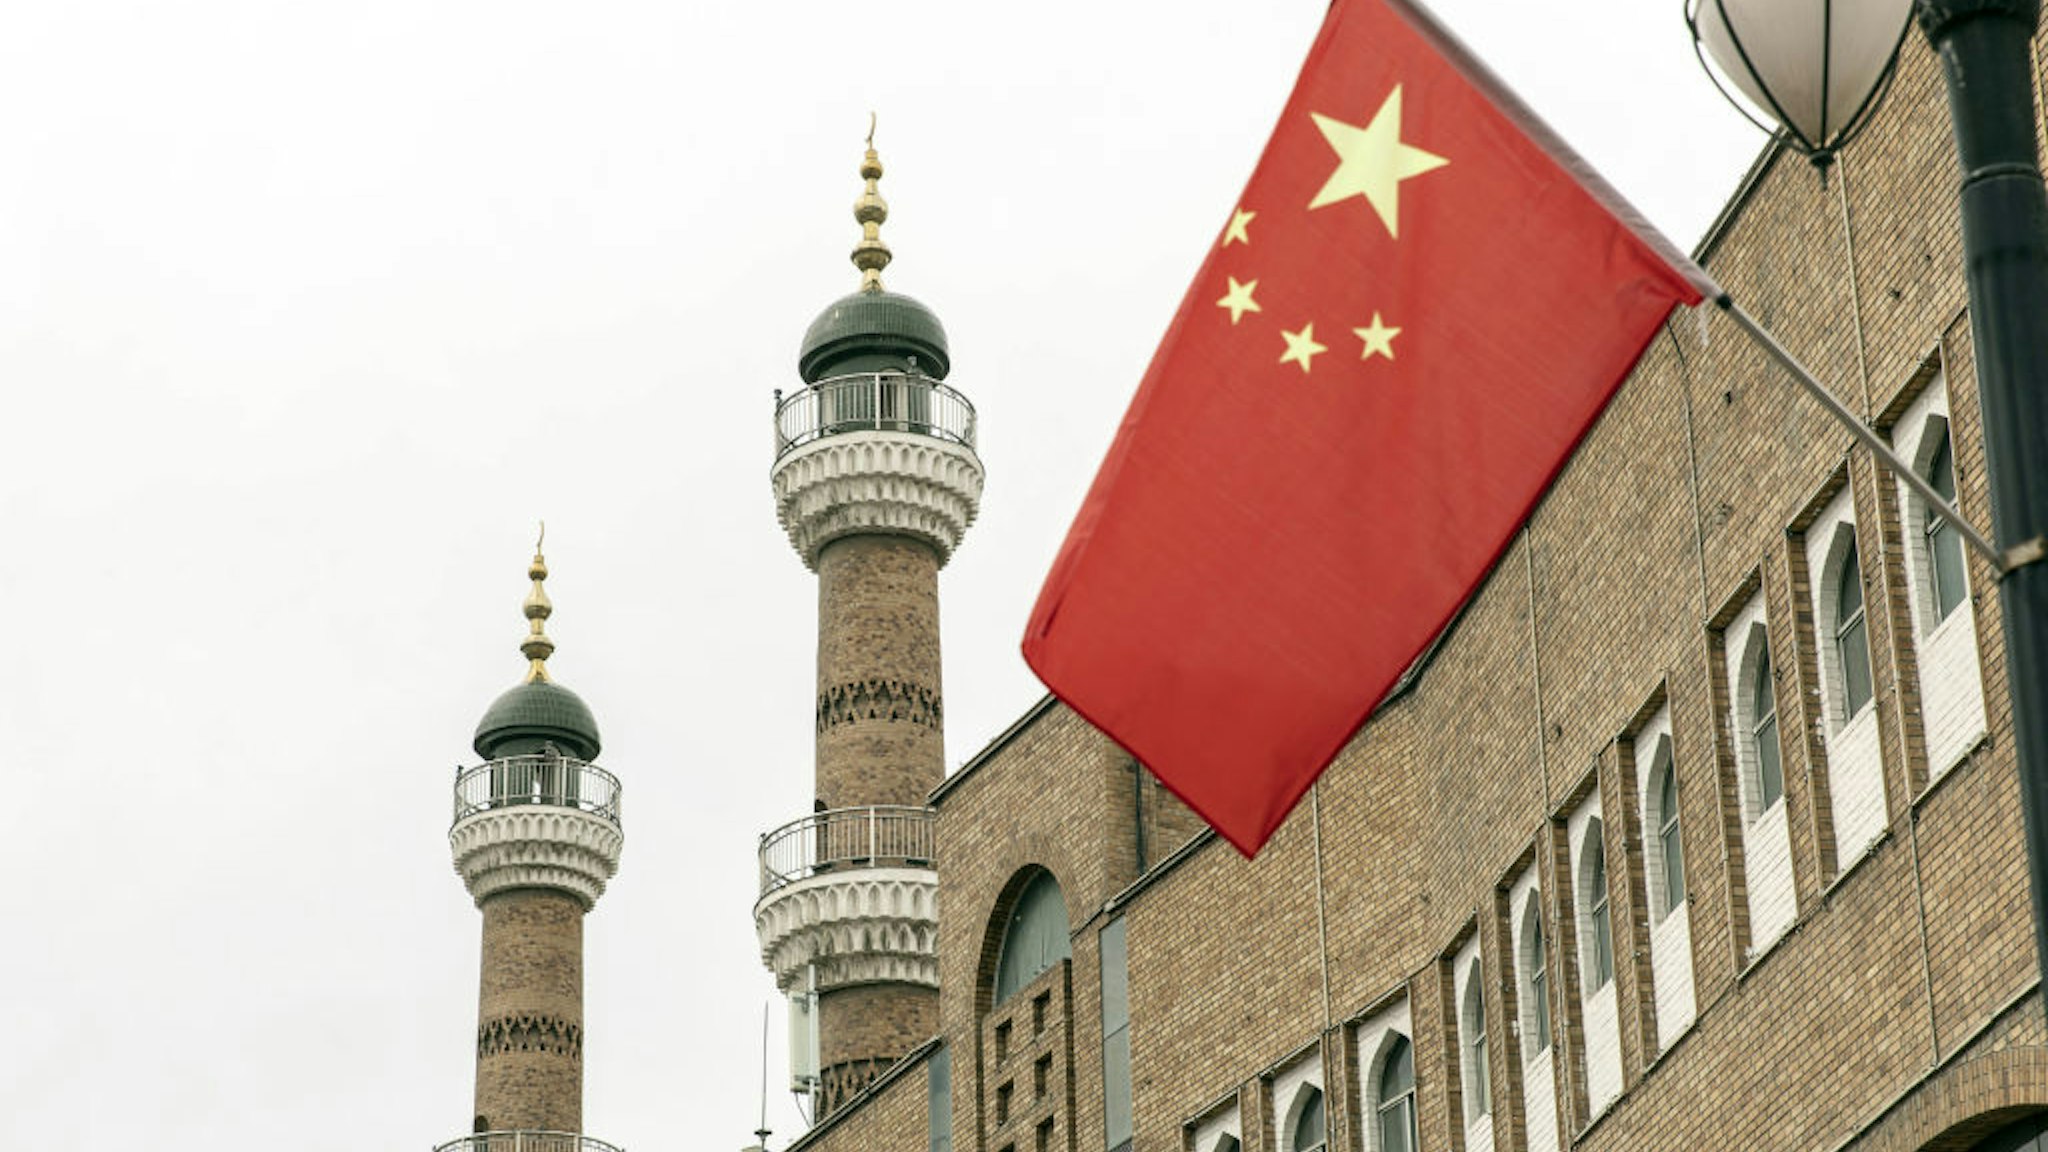 A Chinese national flag outside the Xinjiang International Grand Bazaar in Urumqi, Xinjiang province, China, on Wednesday, May 12, 2021. China has told nations criticizing its policies in Xinjiang to stop interfering in domestic affairs.